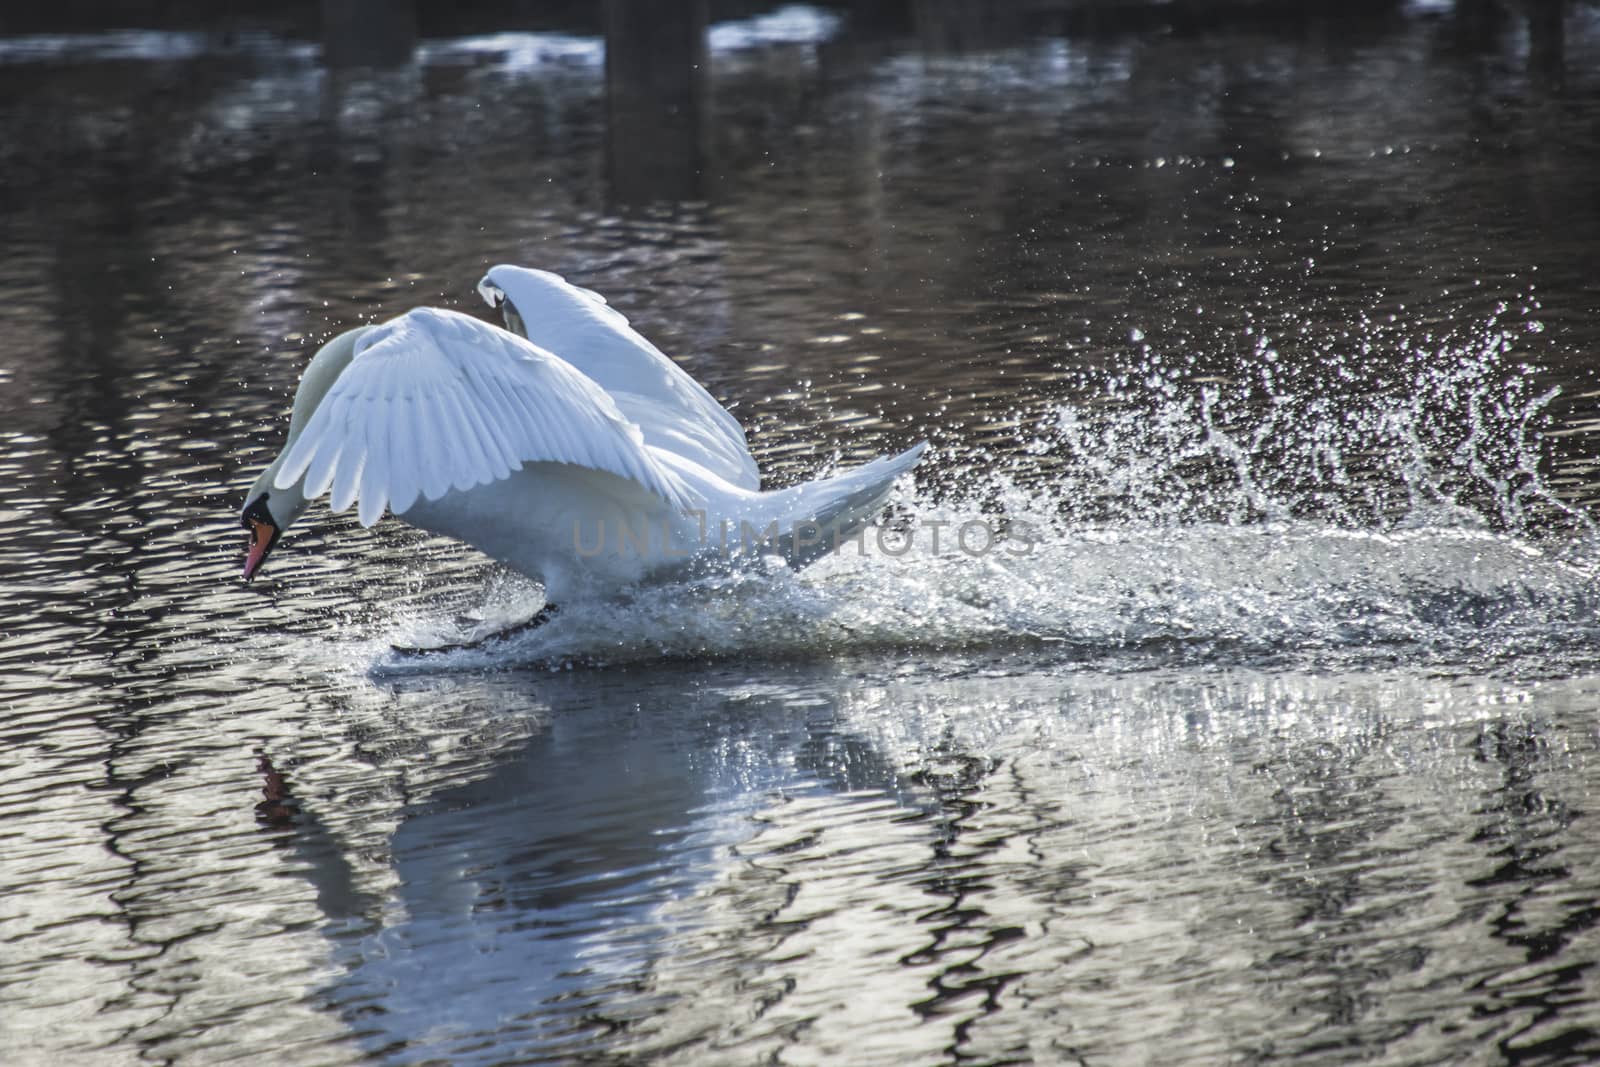 swan landing in the tista river, image 4 by steirus